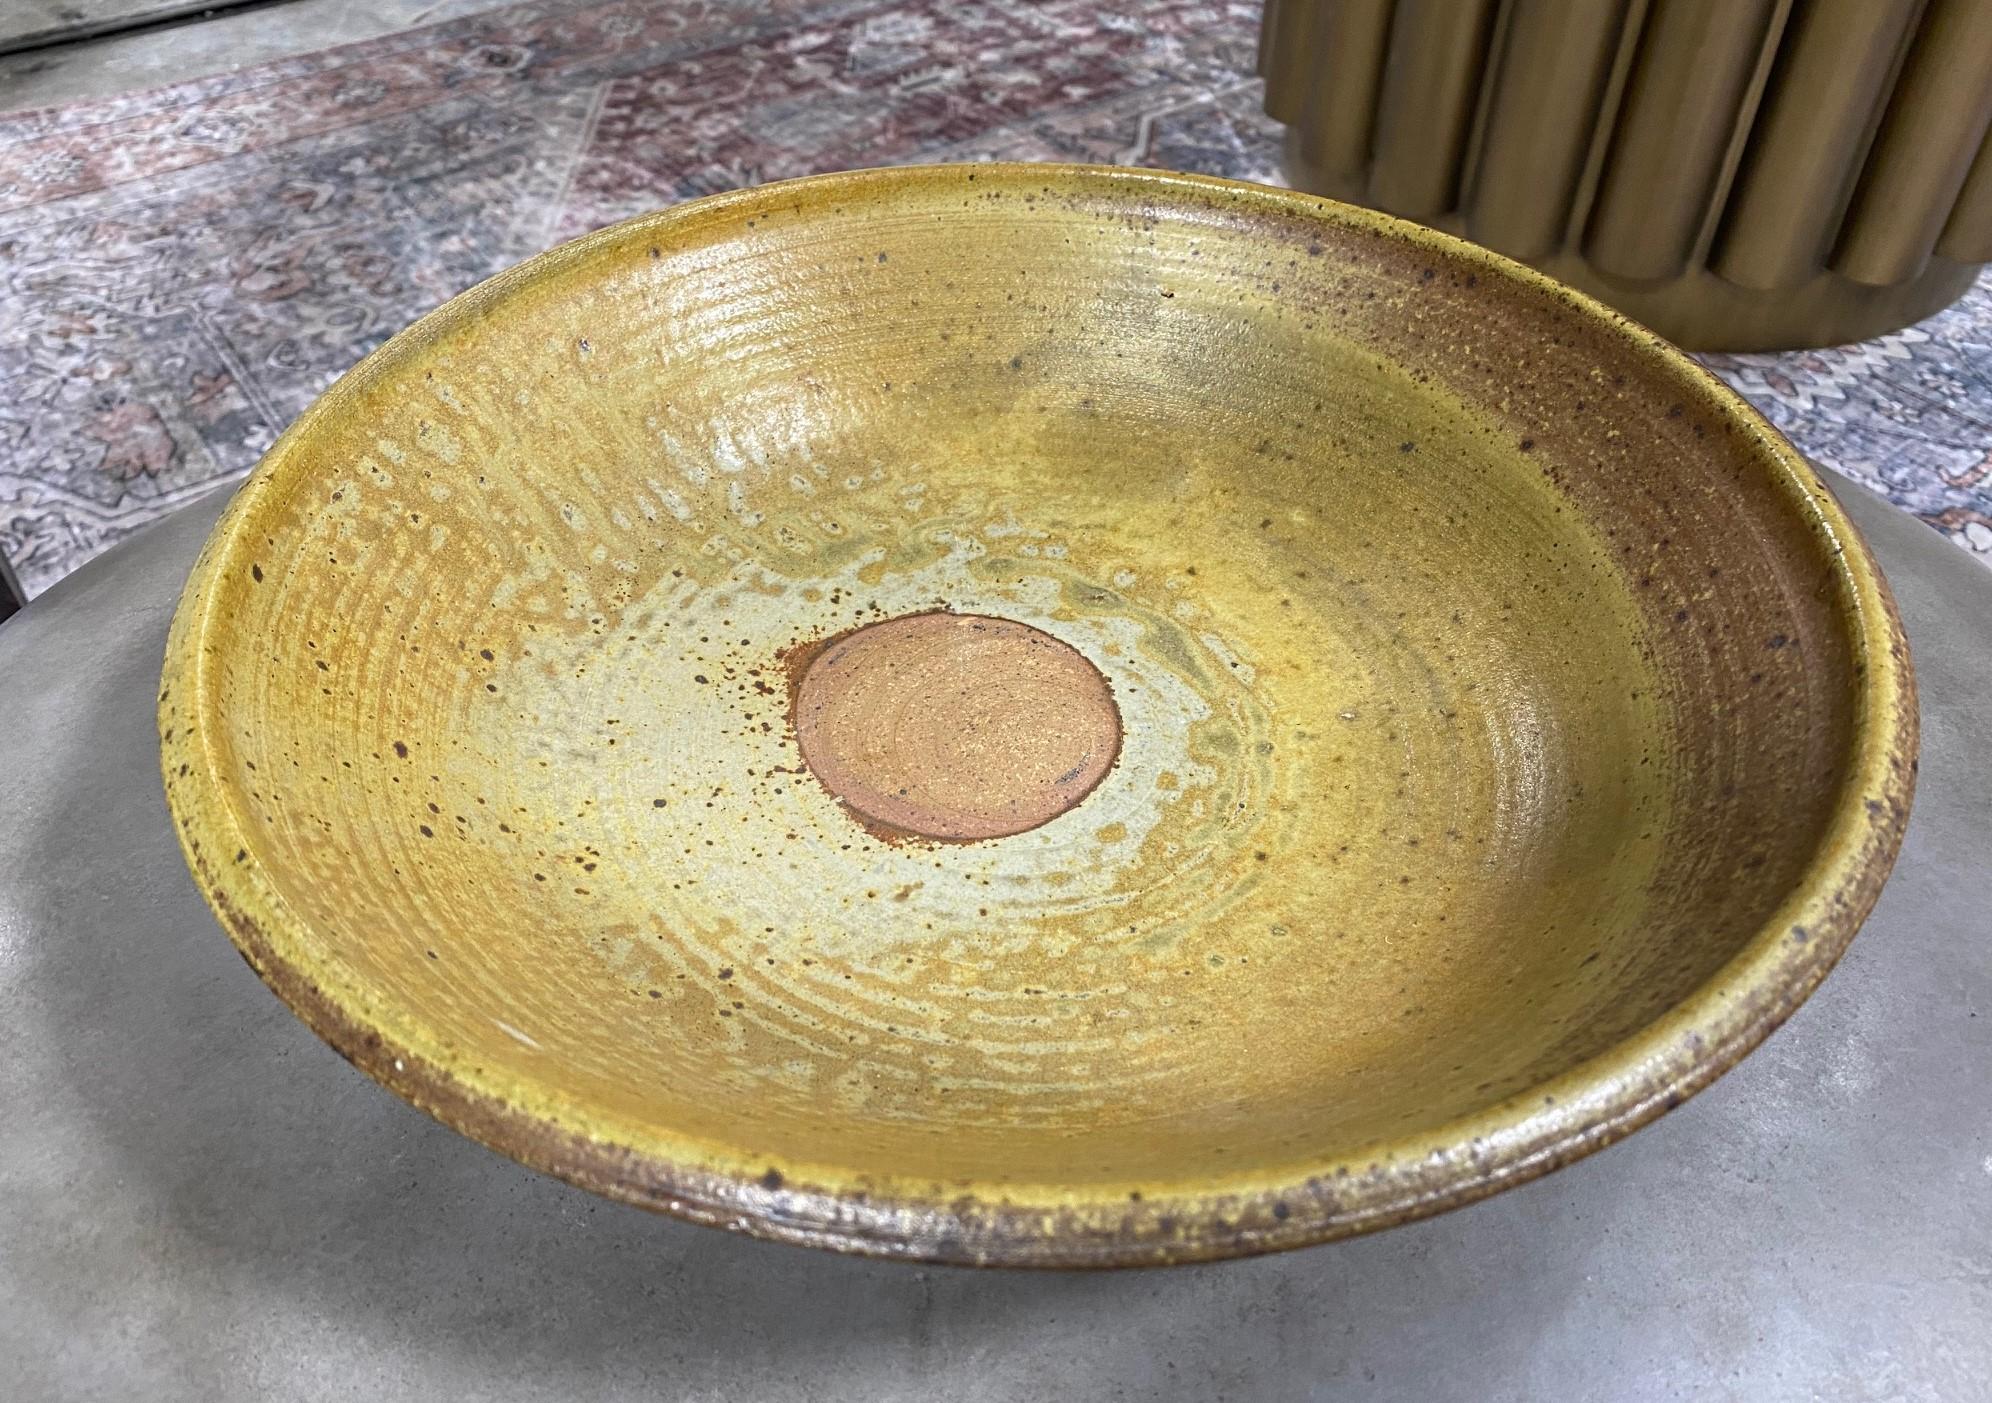 An absolutely gorgeous and wonderful large bowl by famed Japanese Hawaiian American pottery master Toshiko Takaezu. The quite large bowl features a unique design with wonderful browns and greens inter-mixed glazes. It is a unique and one-of-a-kind